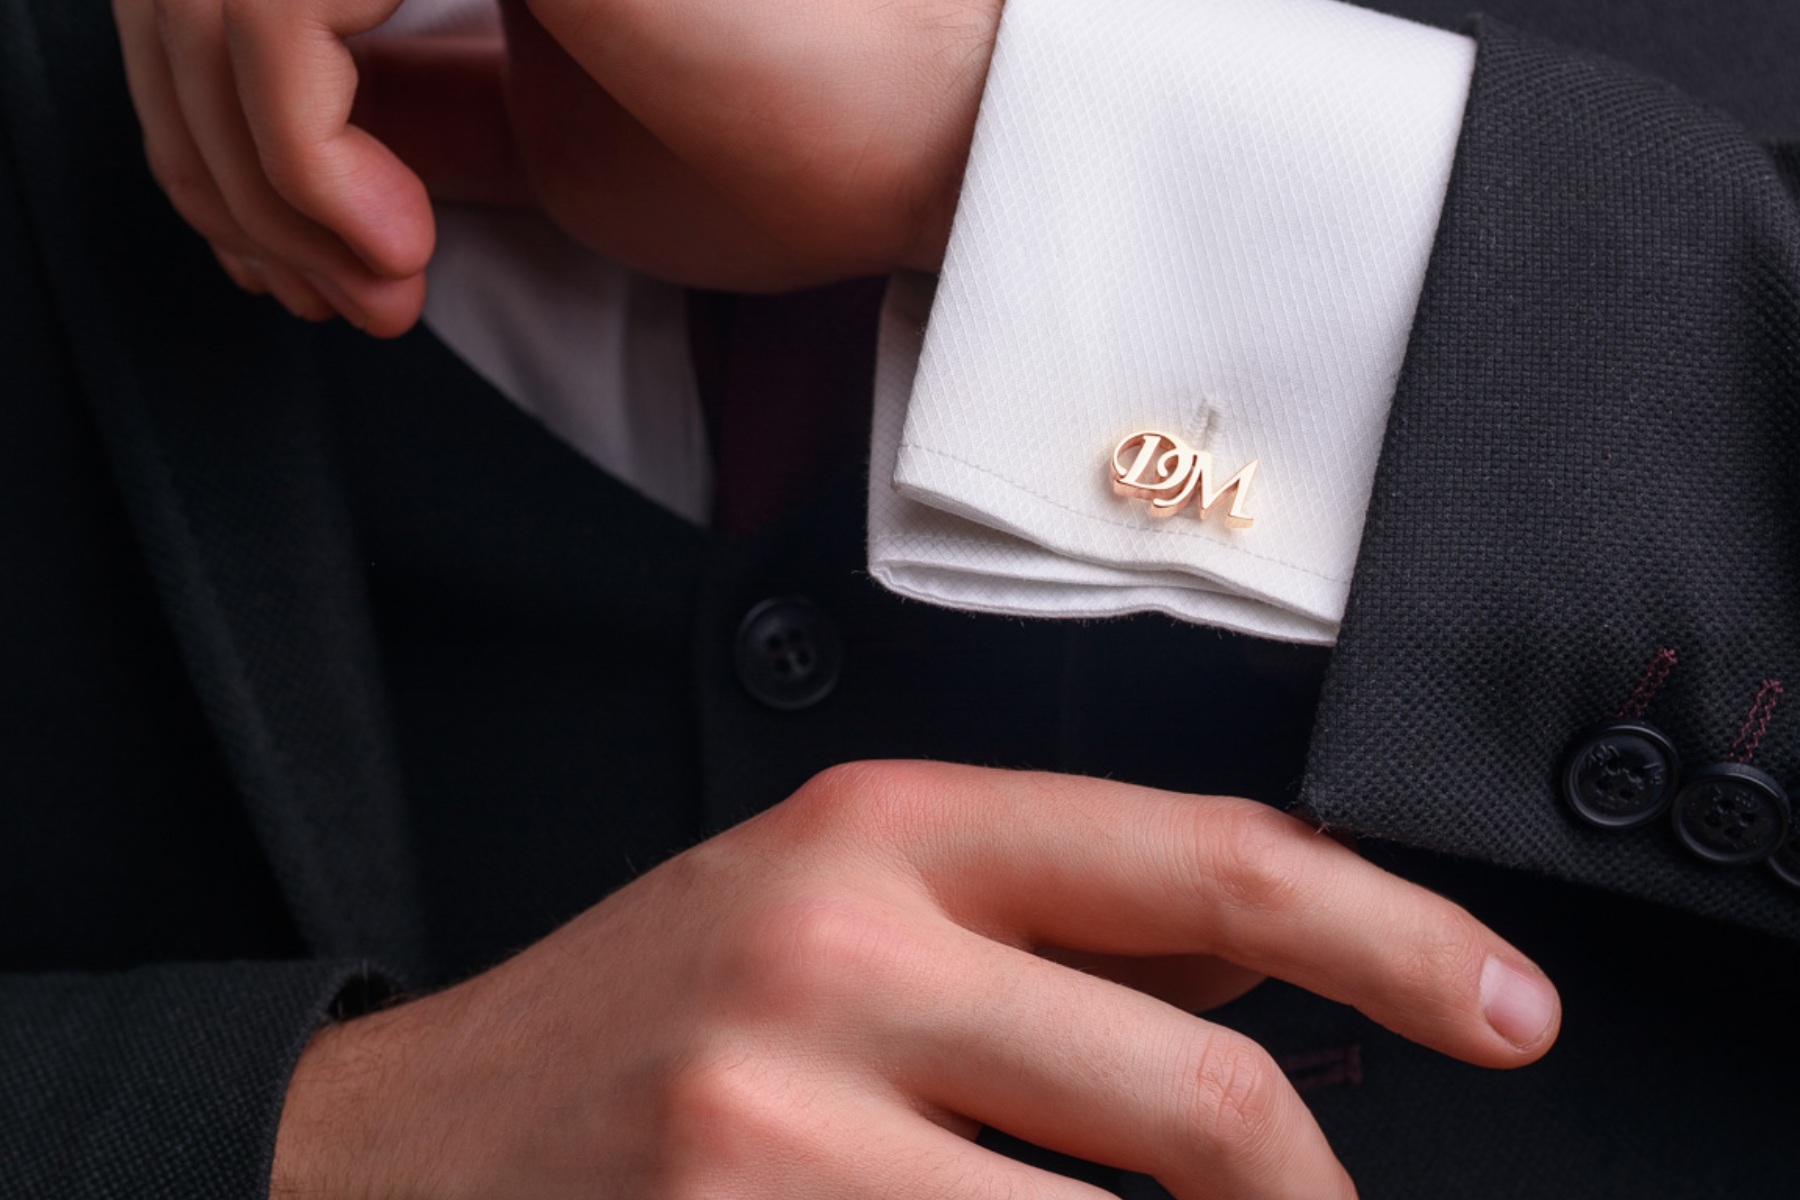 A man in a formal suit with a monogrammed cufflink